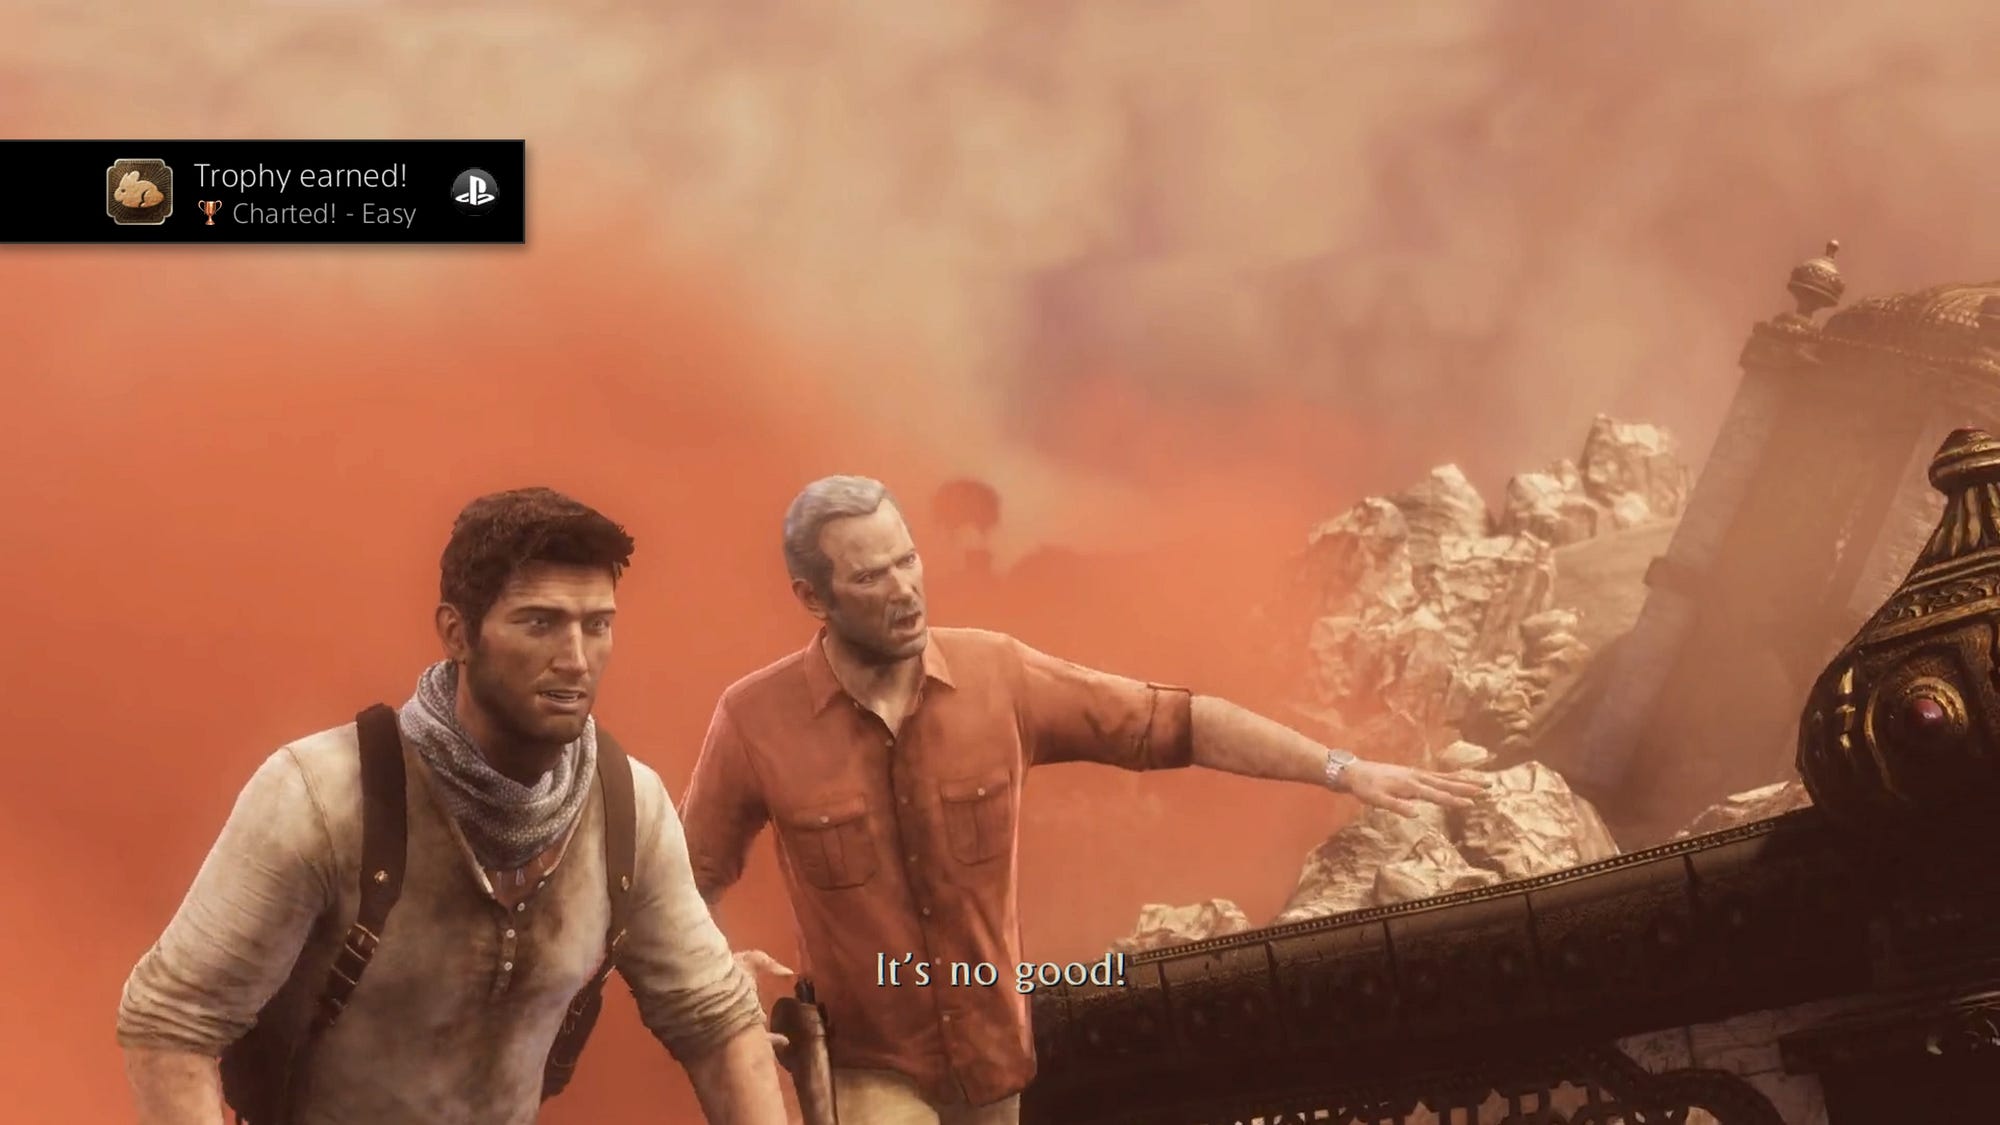 PLAY Magazine on X: Uncharted 3: Drake's Deception released 10 years ago  today! With some incredible setpieces and tweaks to the gameplay, it's  still quite the achievement.  / X